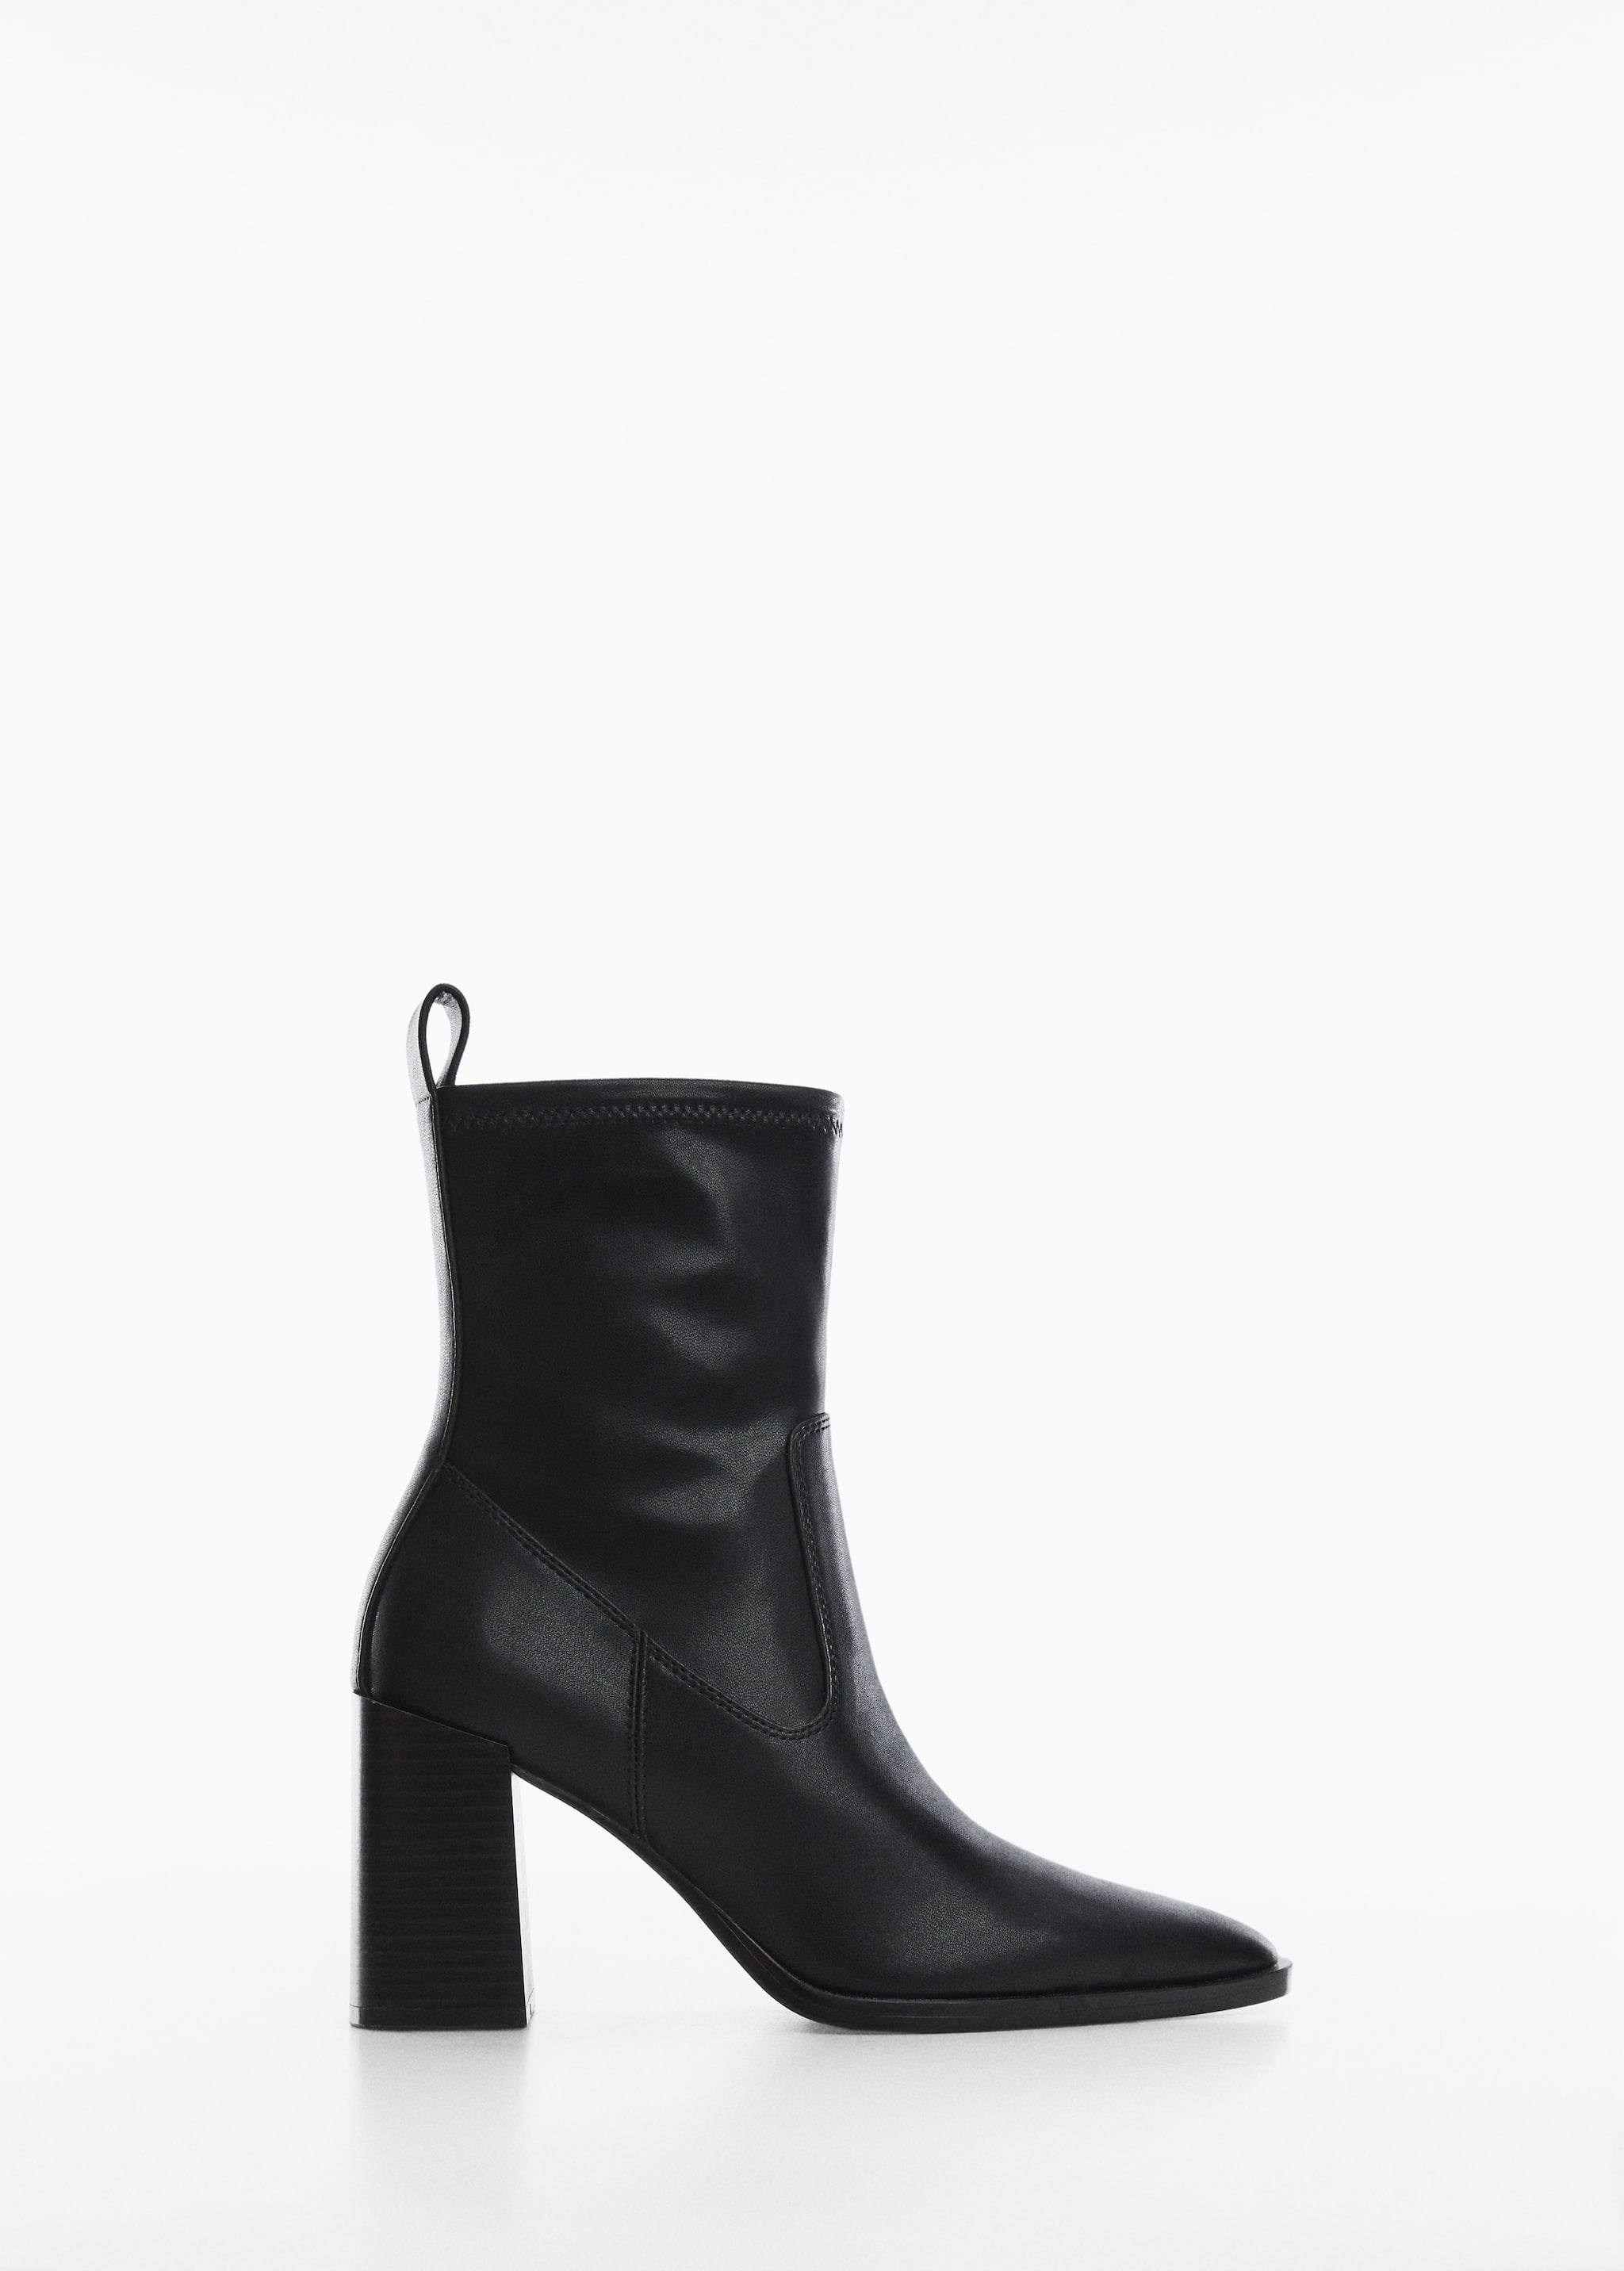 Heel zipped boots - Article without model